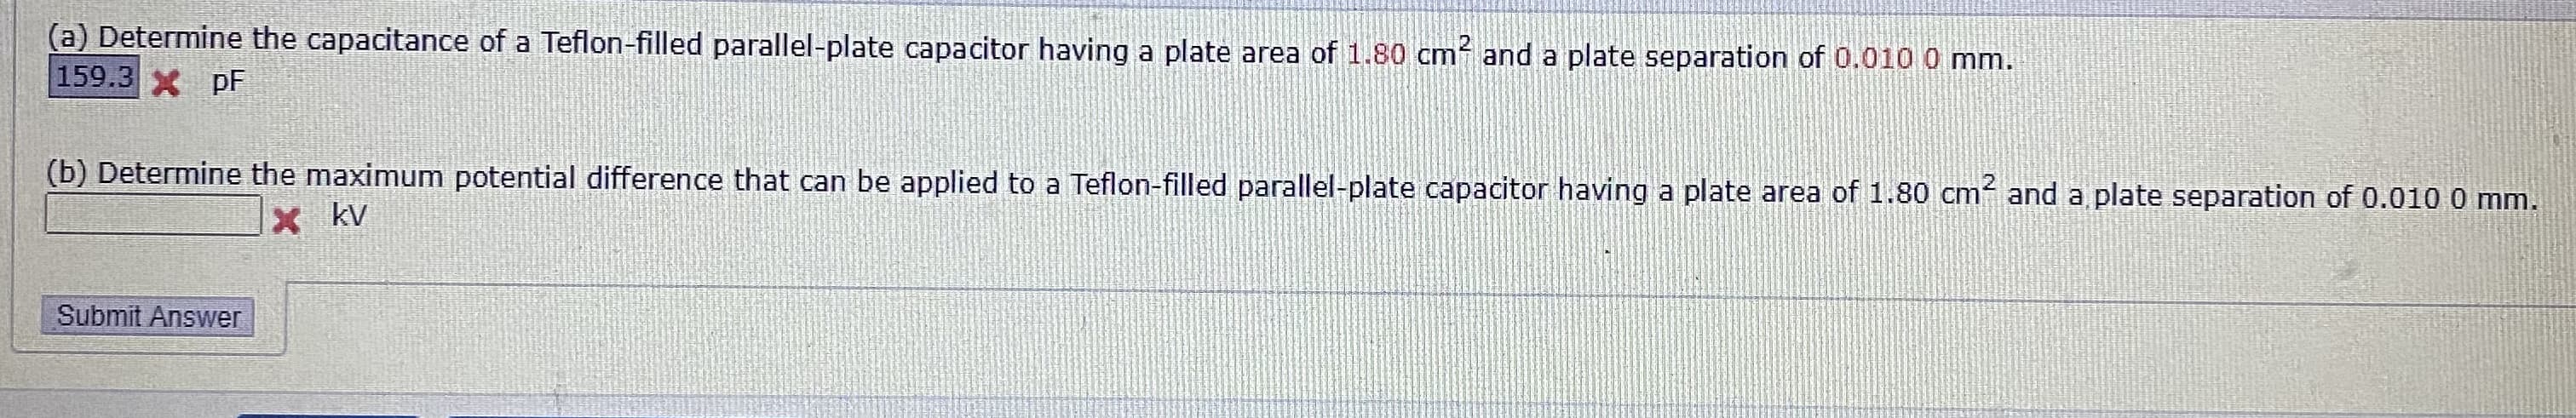 (a) Determine the capacitance of a Teflon-filled parallel-plate capacitor having a plate area of 1.80 cm and a plate separation of 0.010 0 mm.
159.3X pF
(b) Determine the maximum potential difference that can be applied to a Teflon-filled parallel-plate capacitor having a plate area of 1.80 cm and a plate separation of 0.010 0 mm.
X kv
